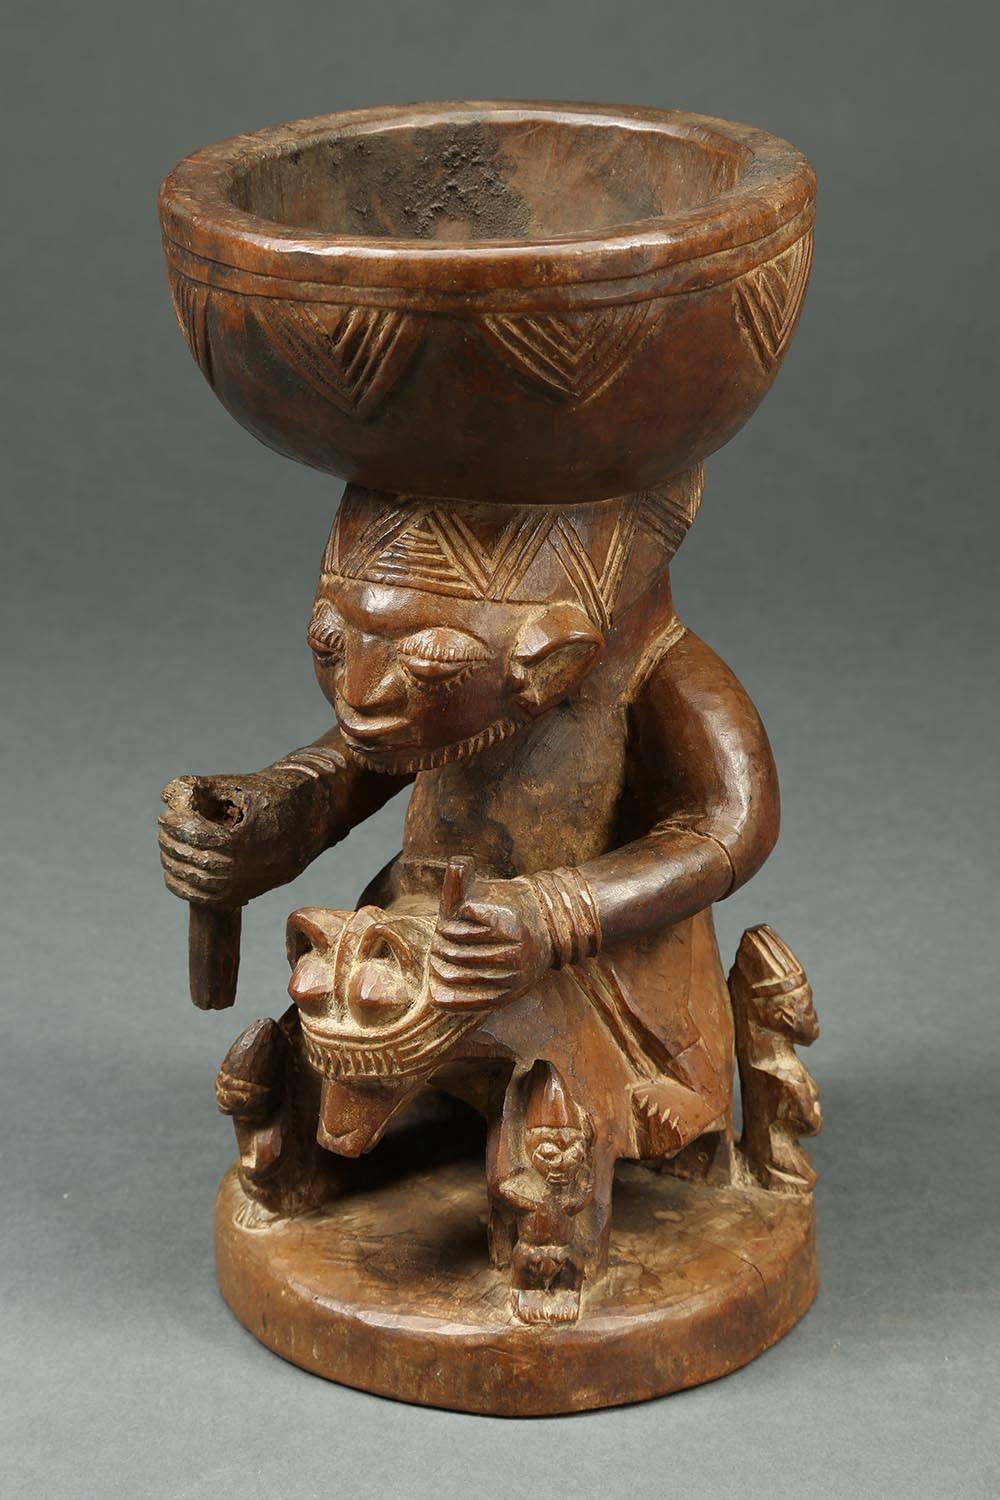 20th Century Yoruba Tribal Offering Bowl with Horse and Rider, Nigeria